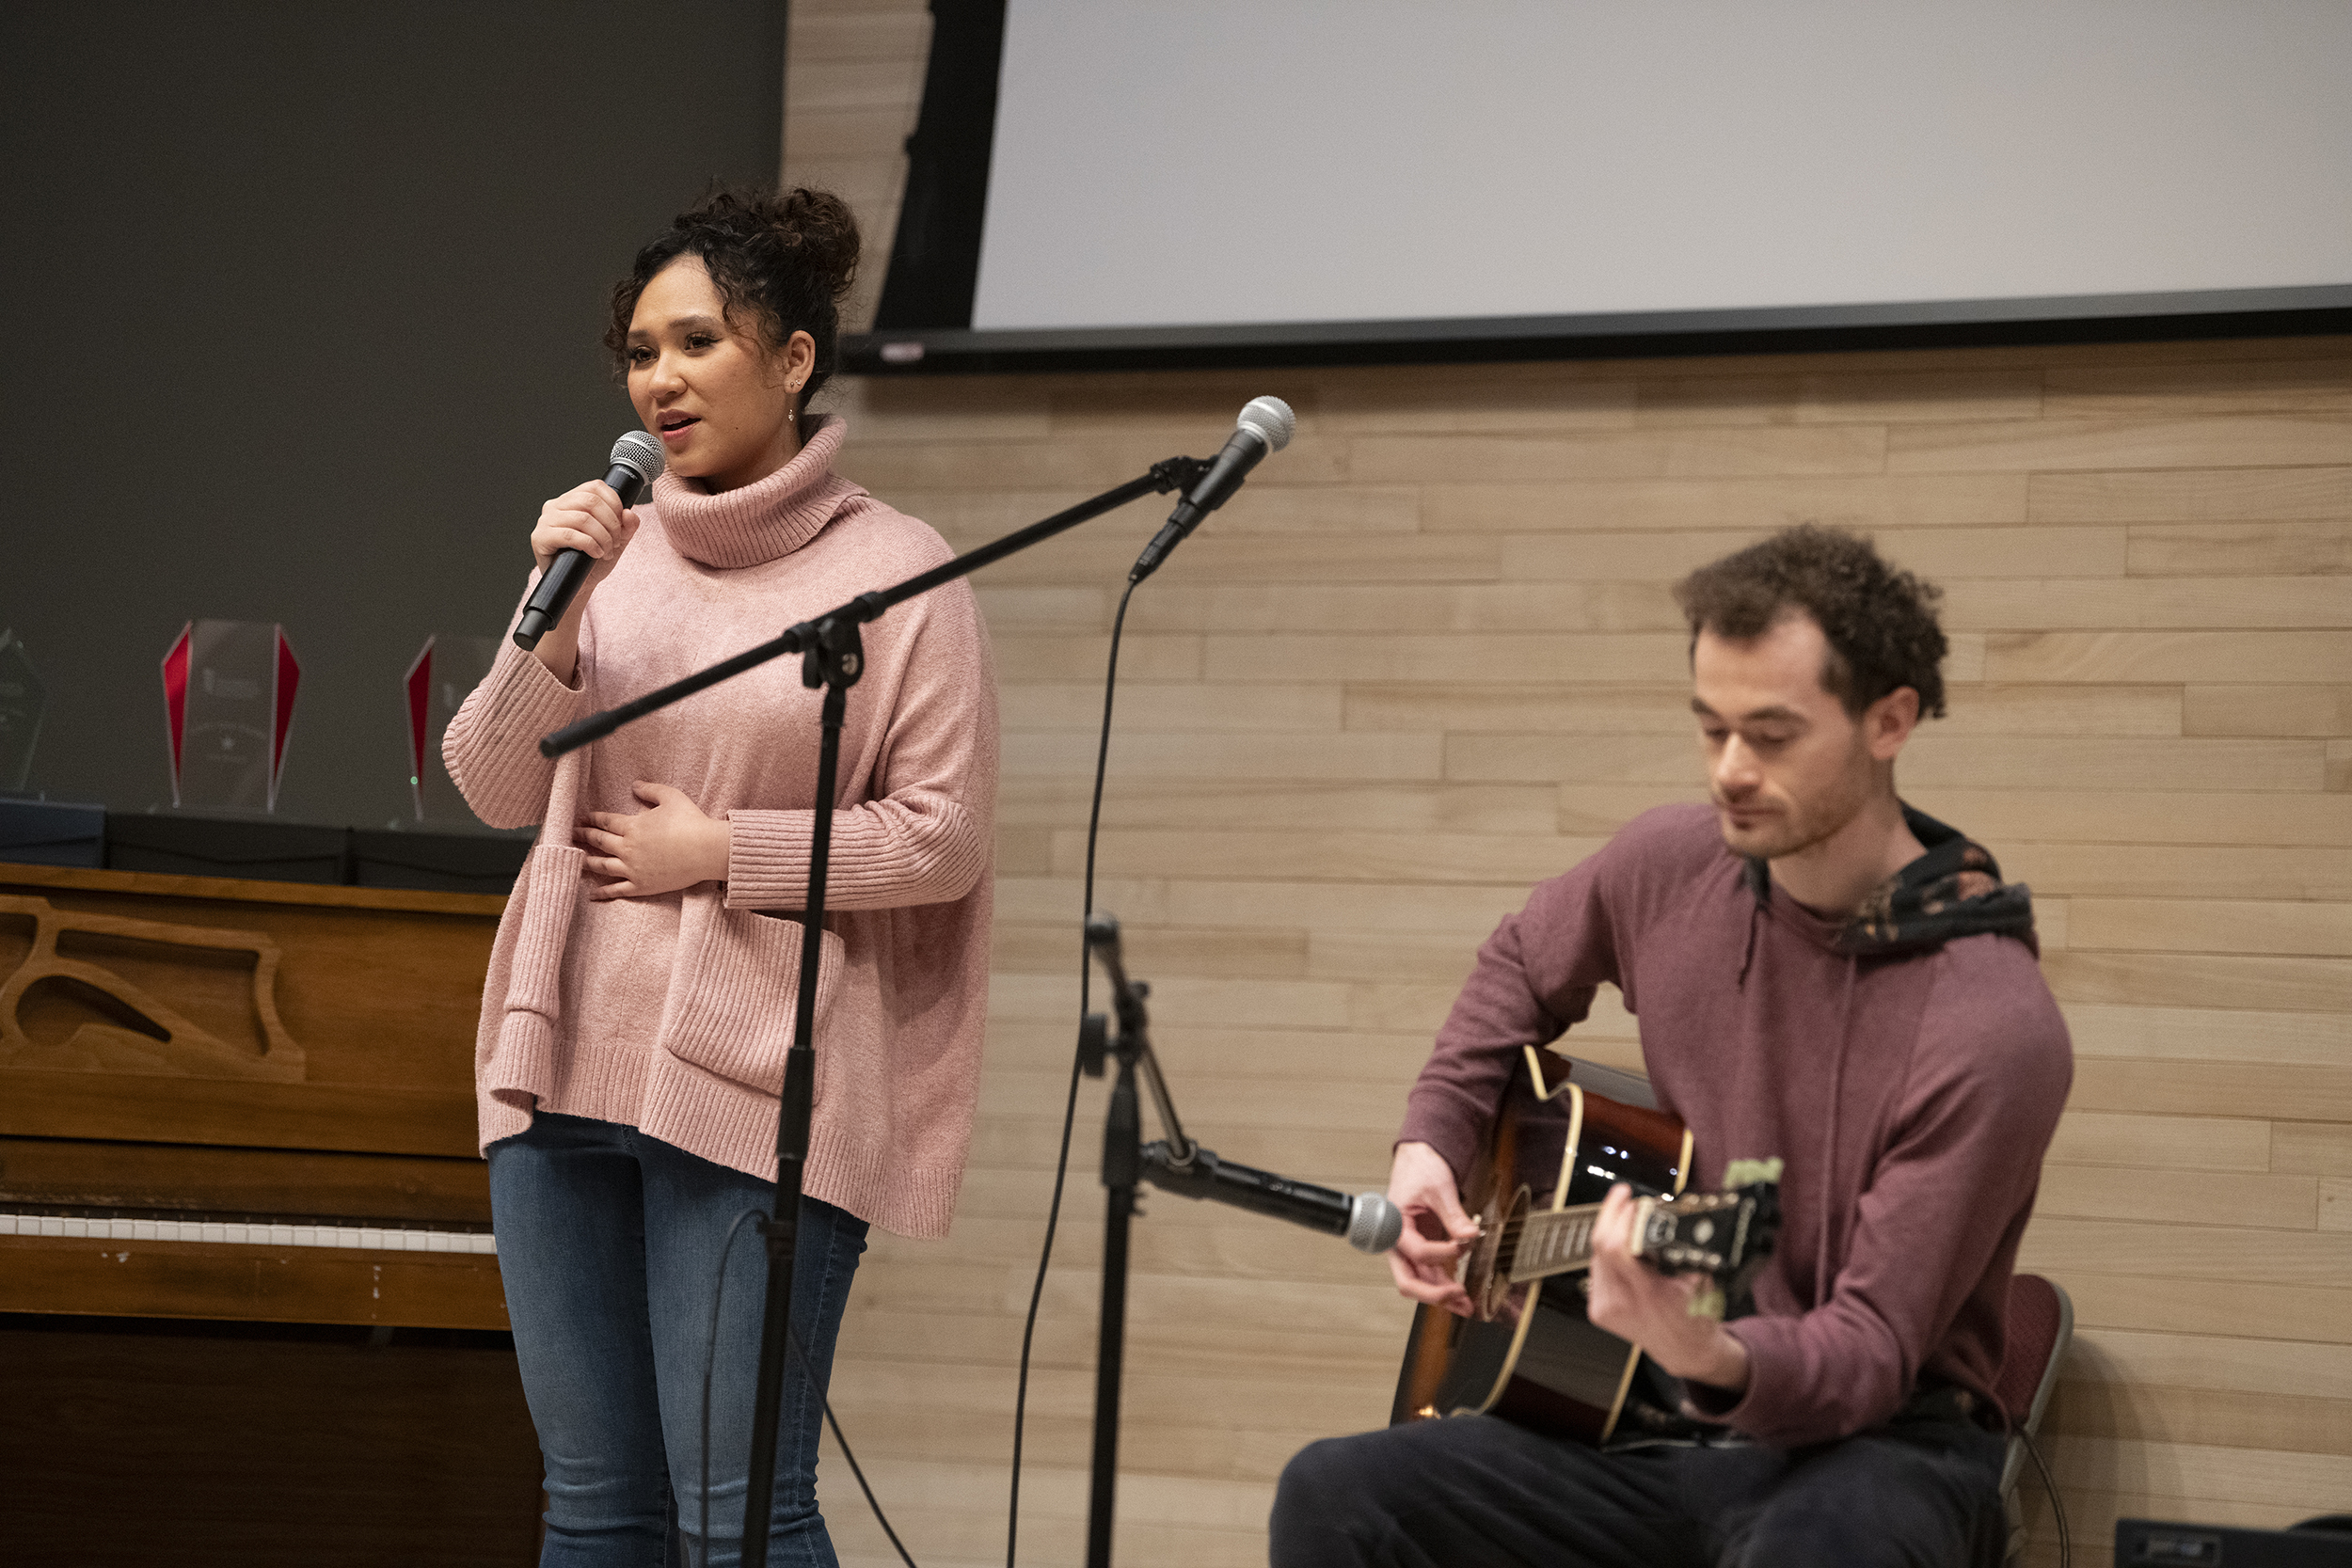 School of Dentistry students  Vanessa Vailoces and Cameron Hadeed perform at the “UMB’s Got Talent” show